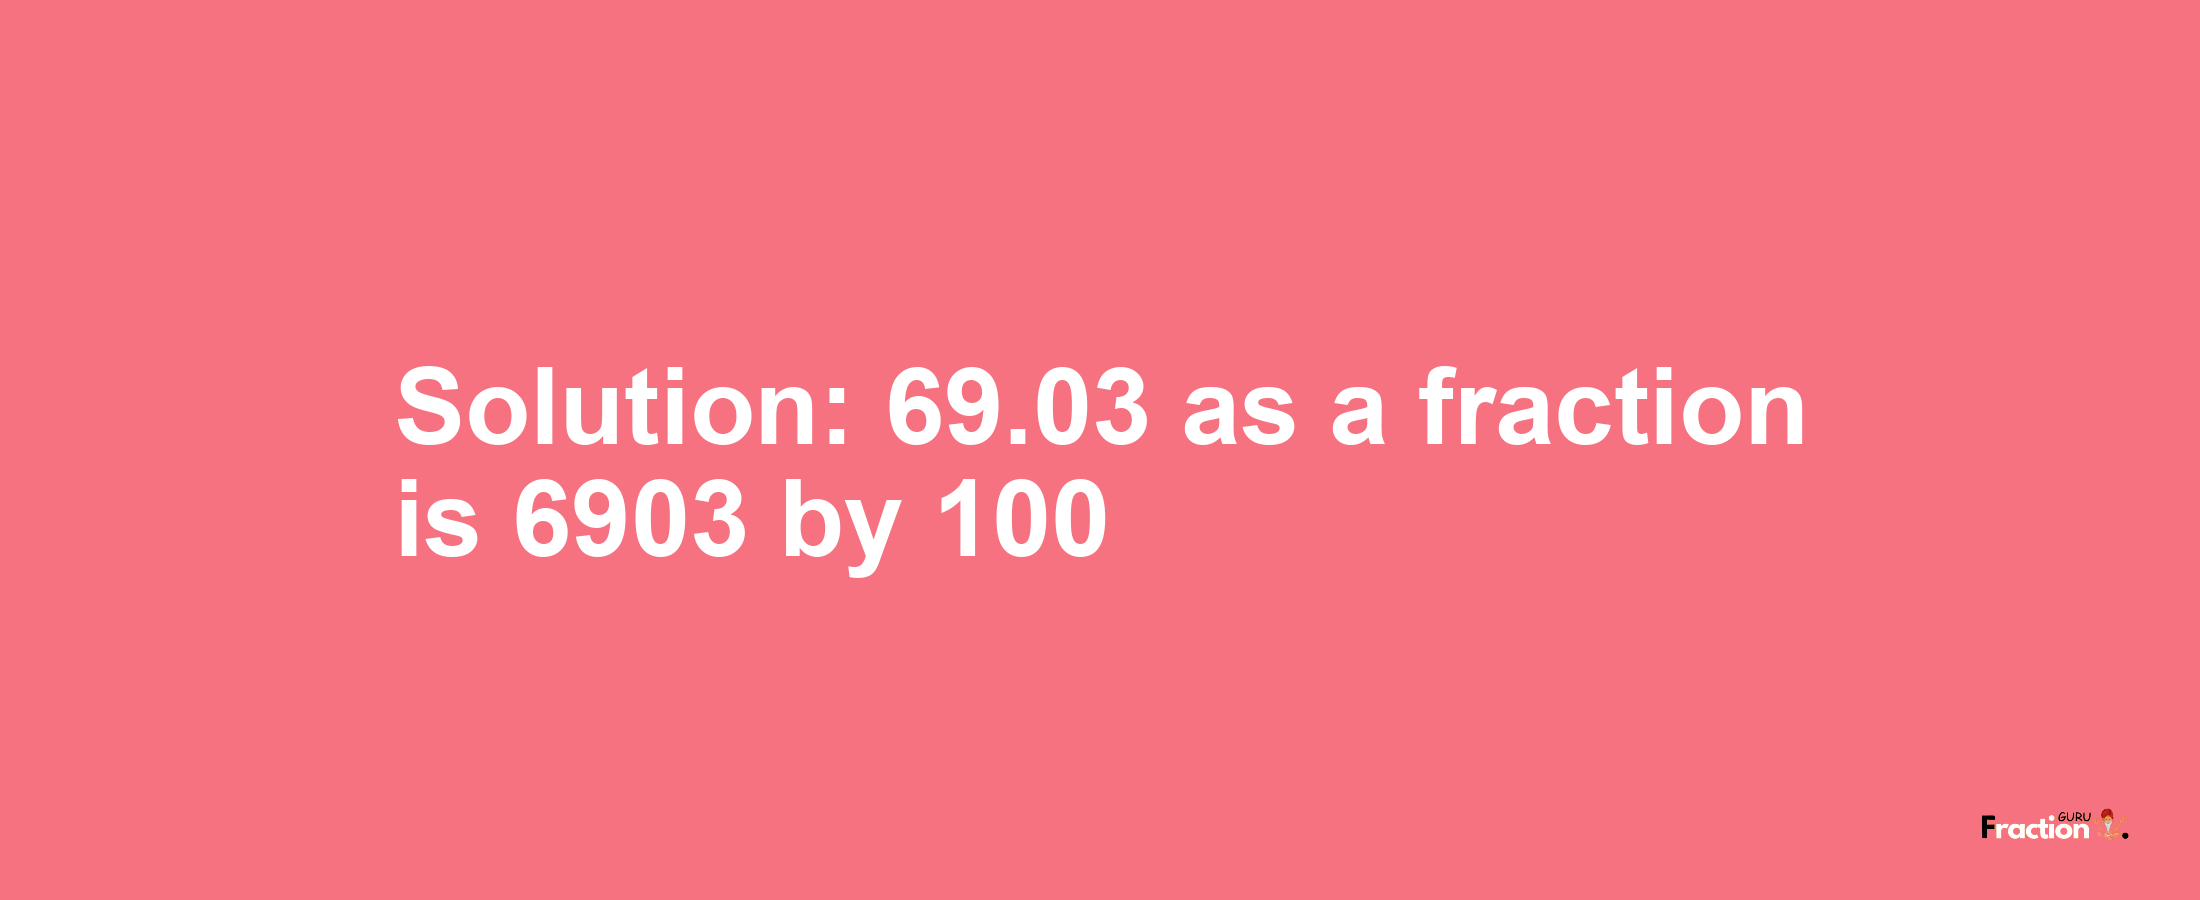 Solution:69.03 as a fraction is 6903/100